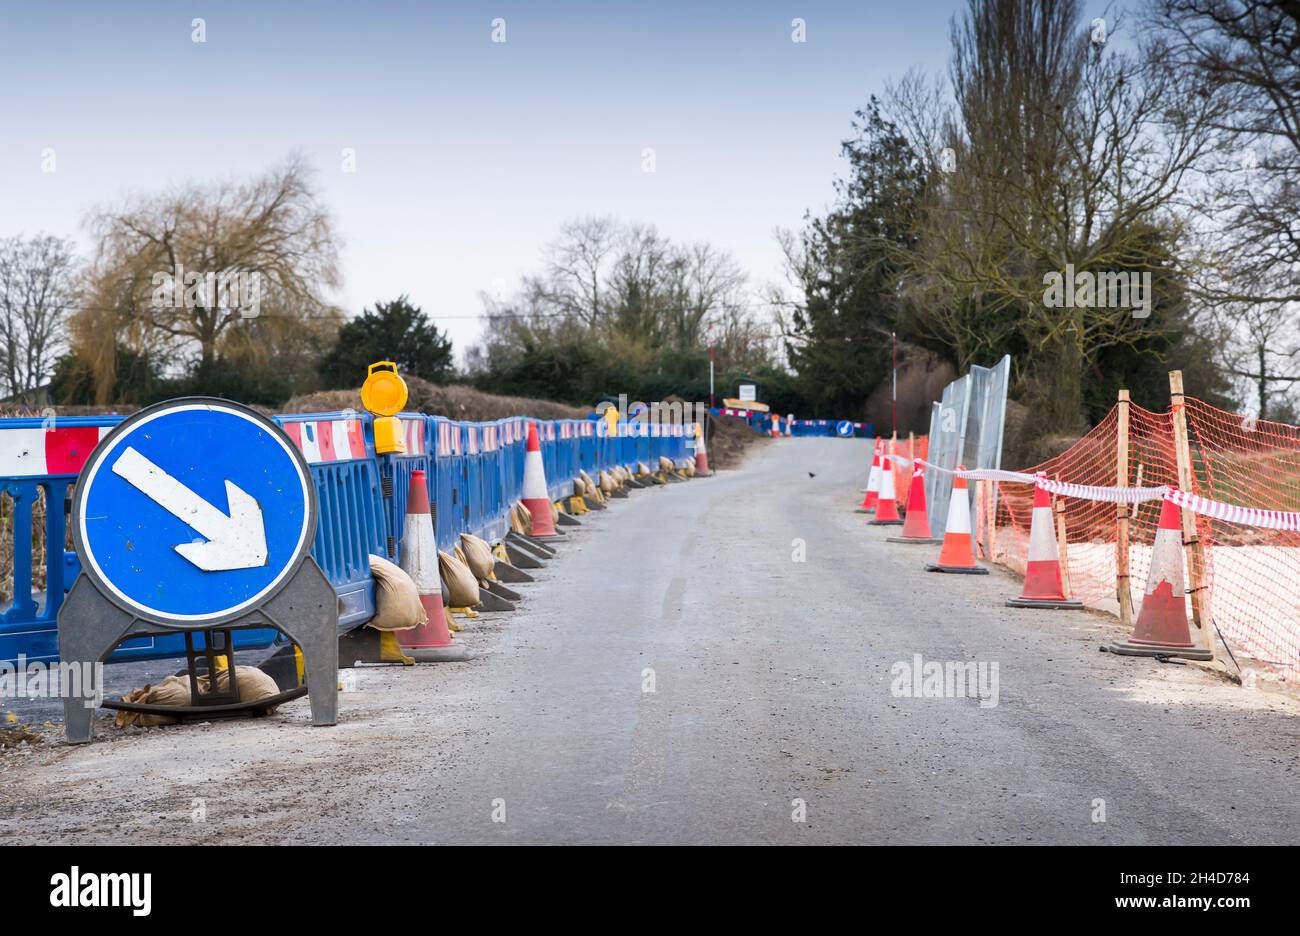 Road closure, roadworks with traffic cones and warning sign on a rural country road in Buckinghamshire, UK Stock Photo